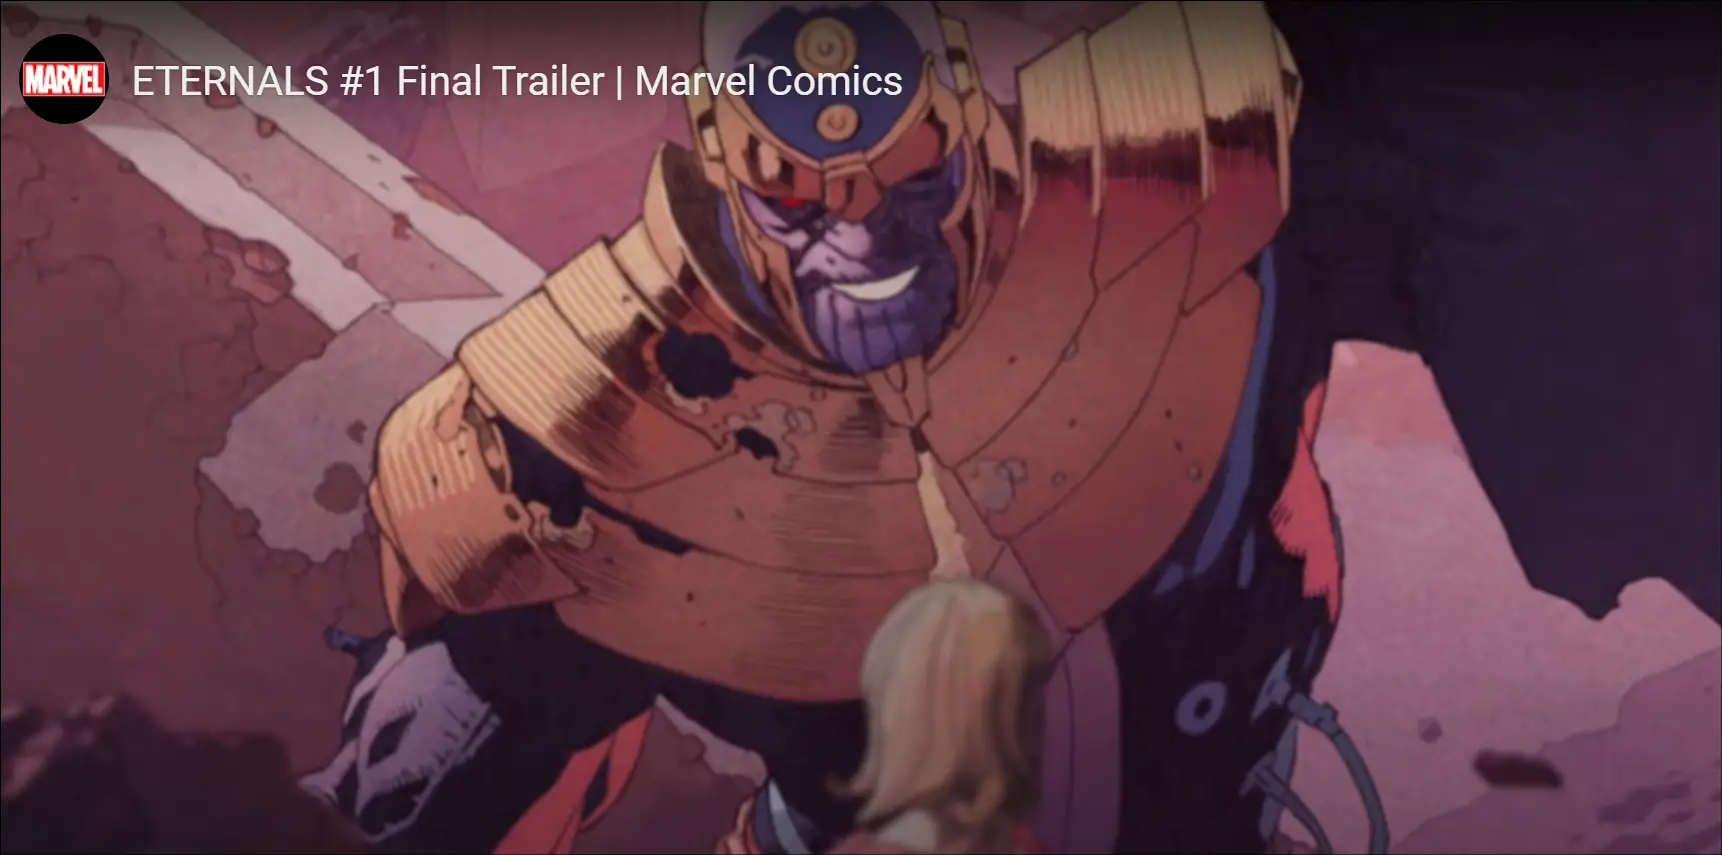 Thanos in new trailer for Eternals Issue #1 